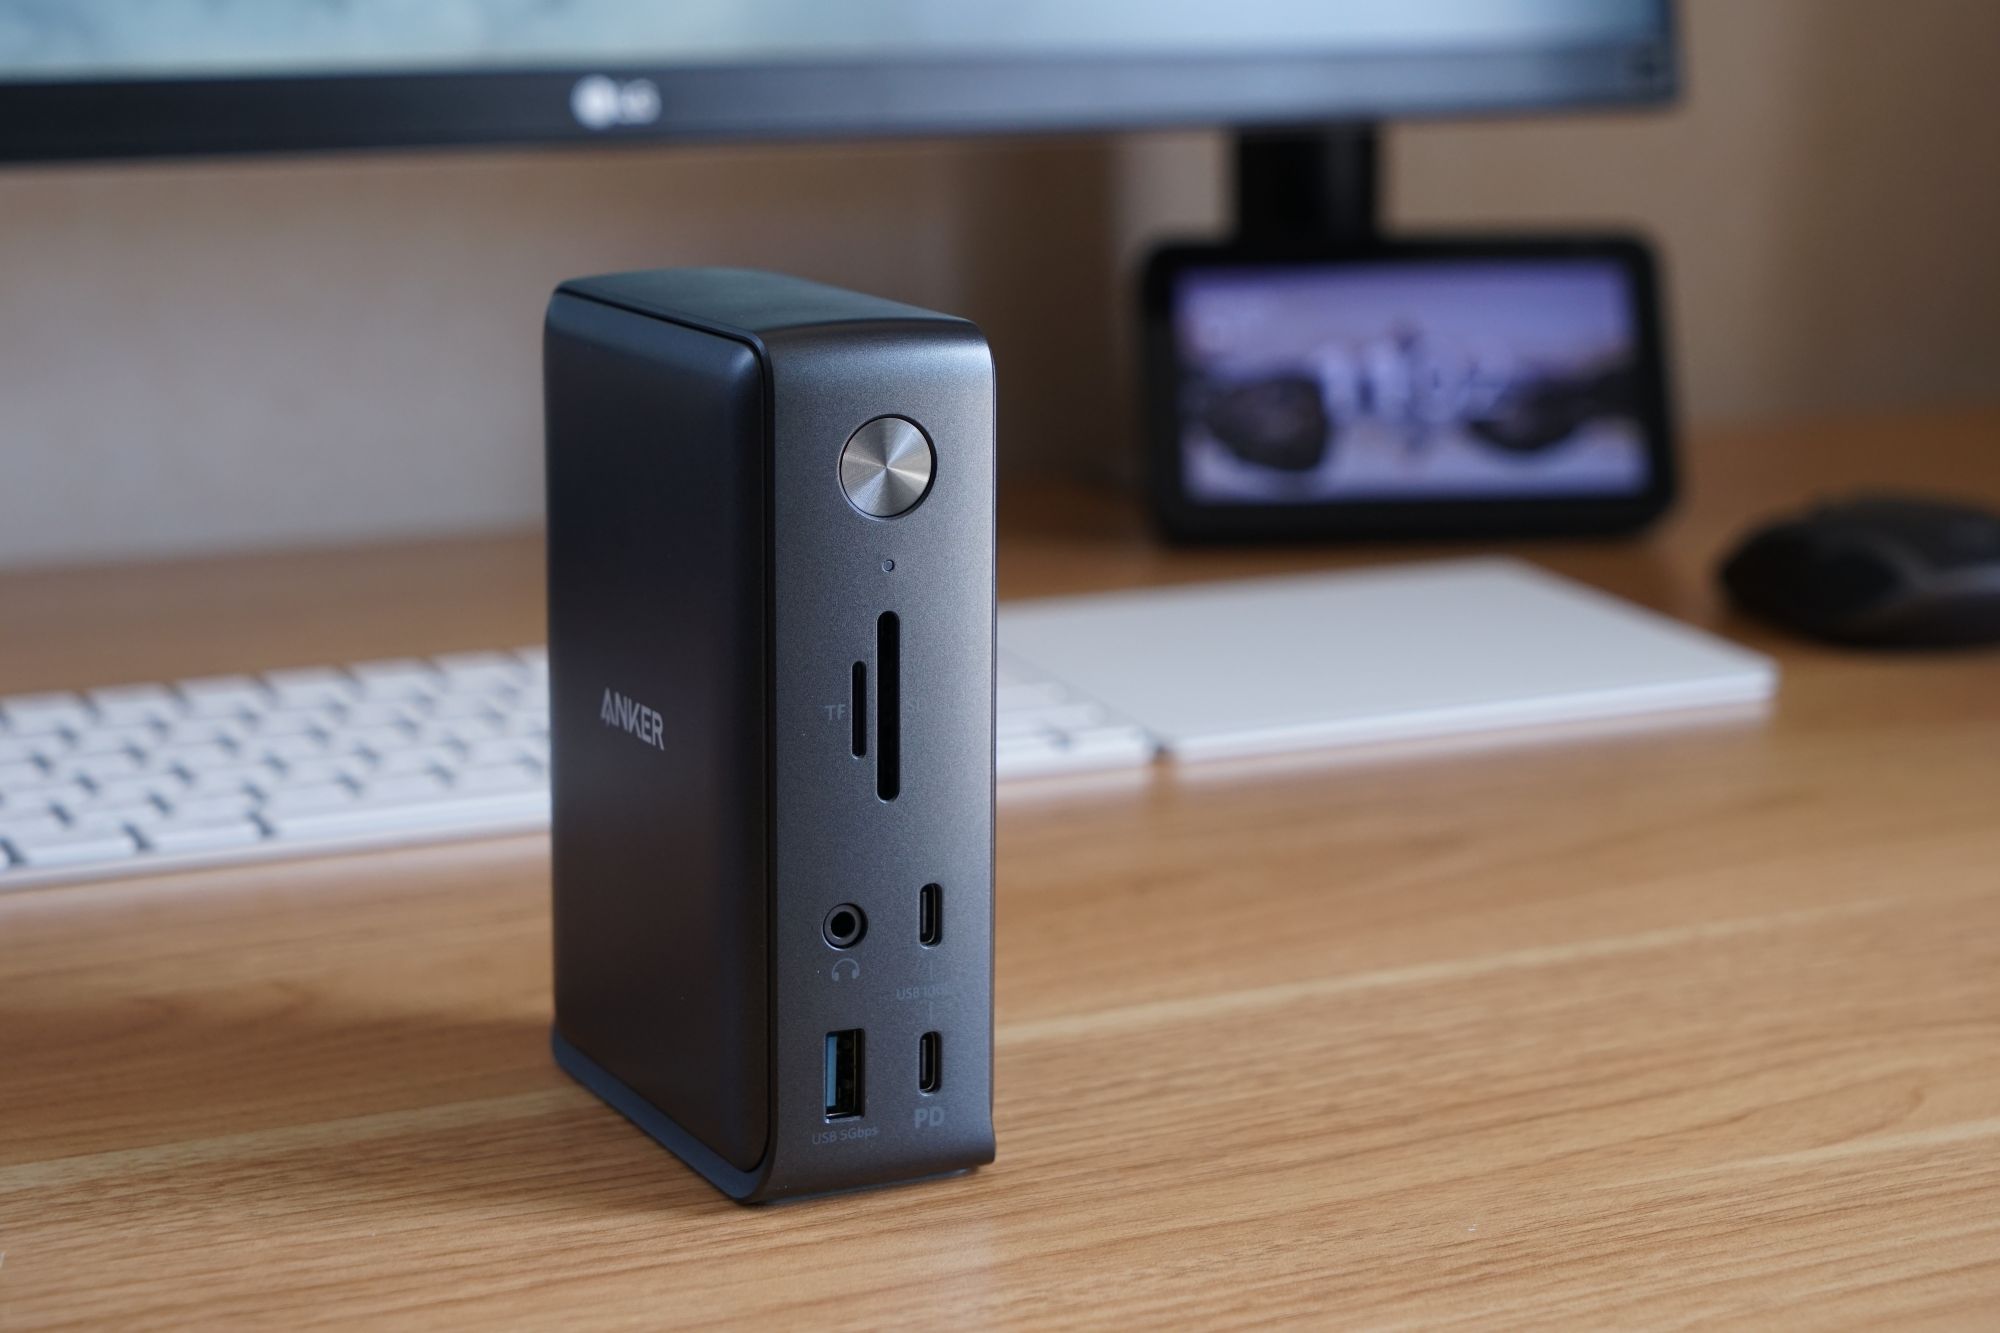 Anker PowerExpand 13-in-1 USB-C Dock